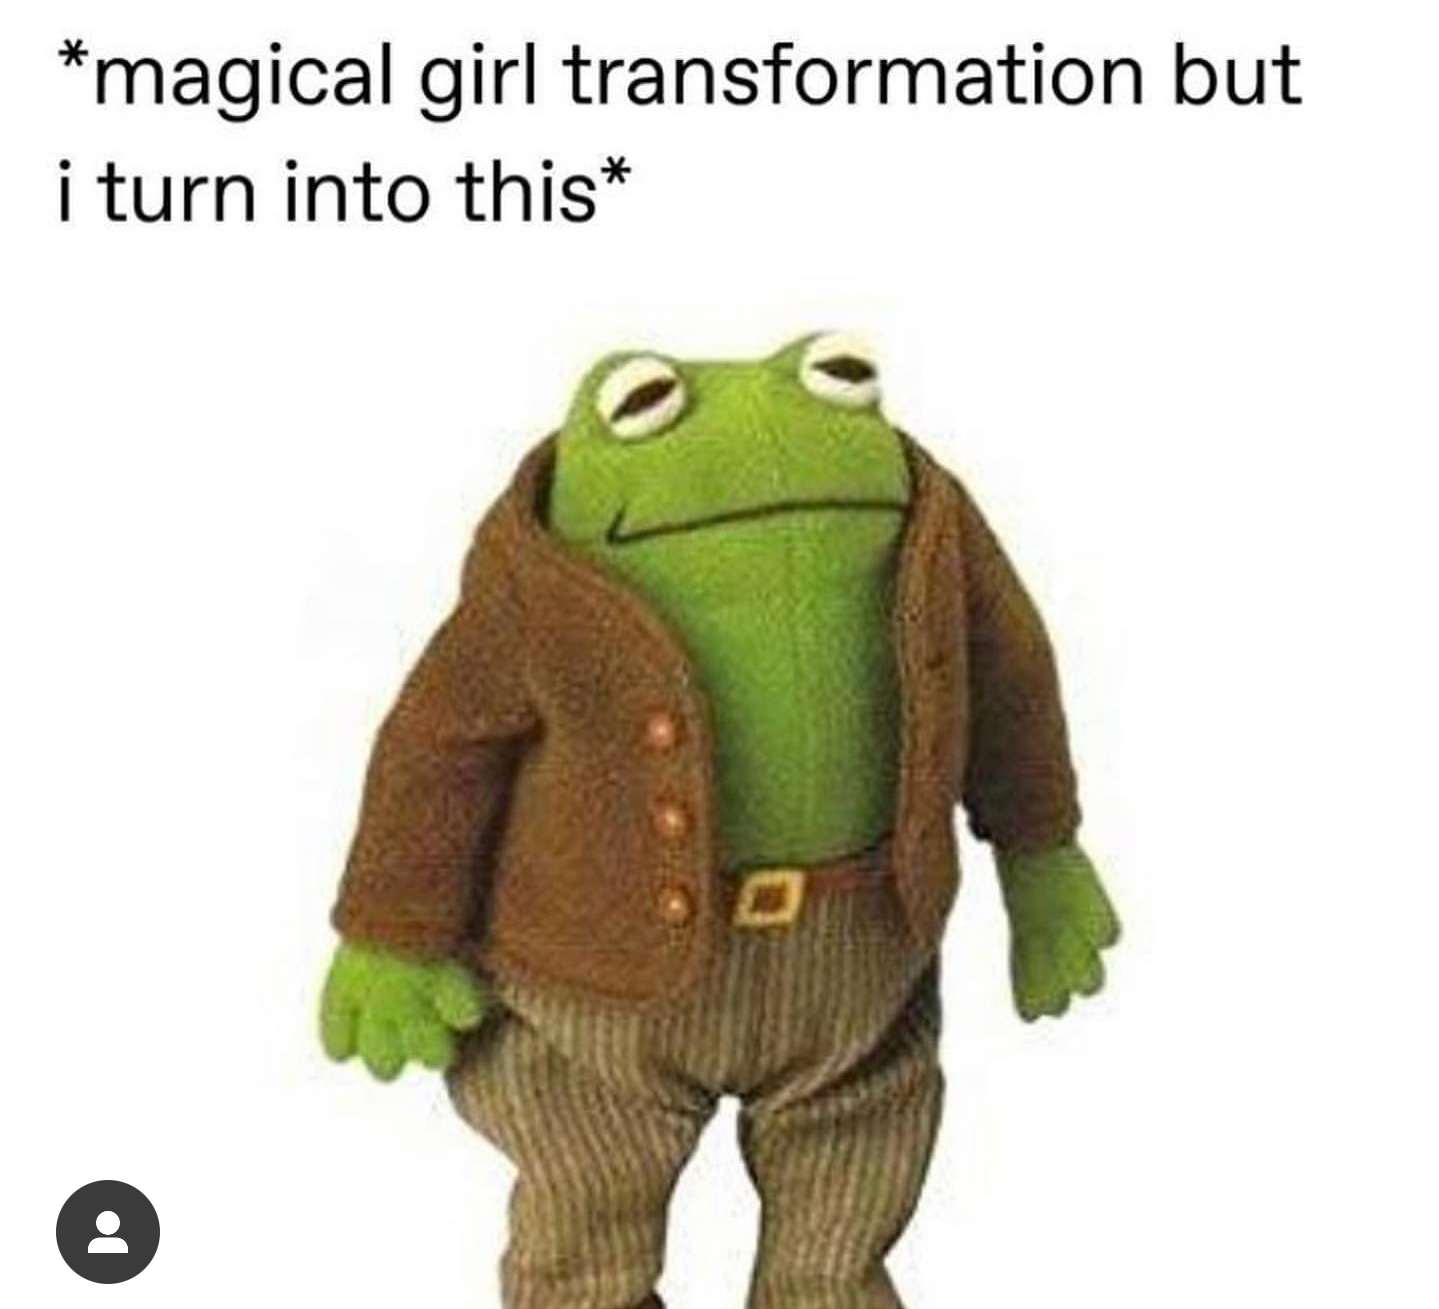 frog and toad plush - magical girl transformation but i turn into this